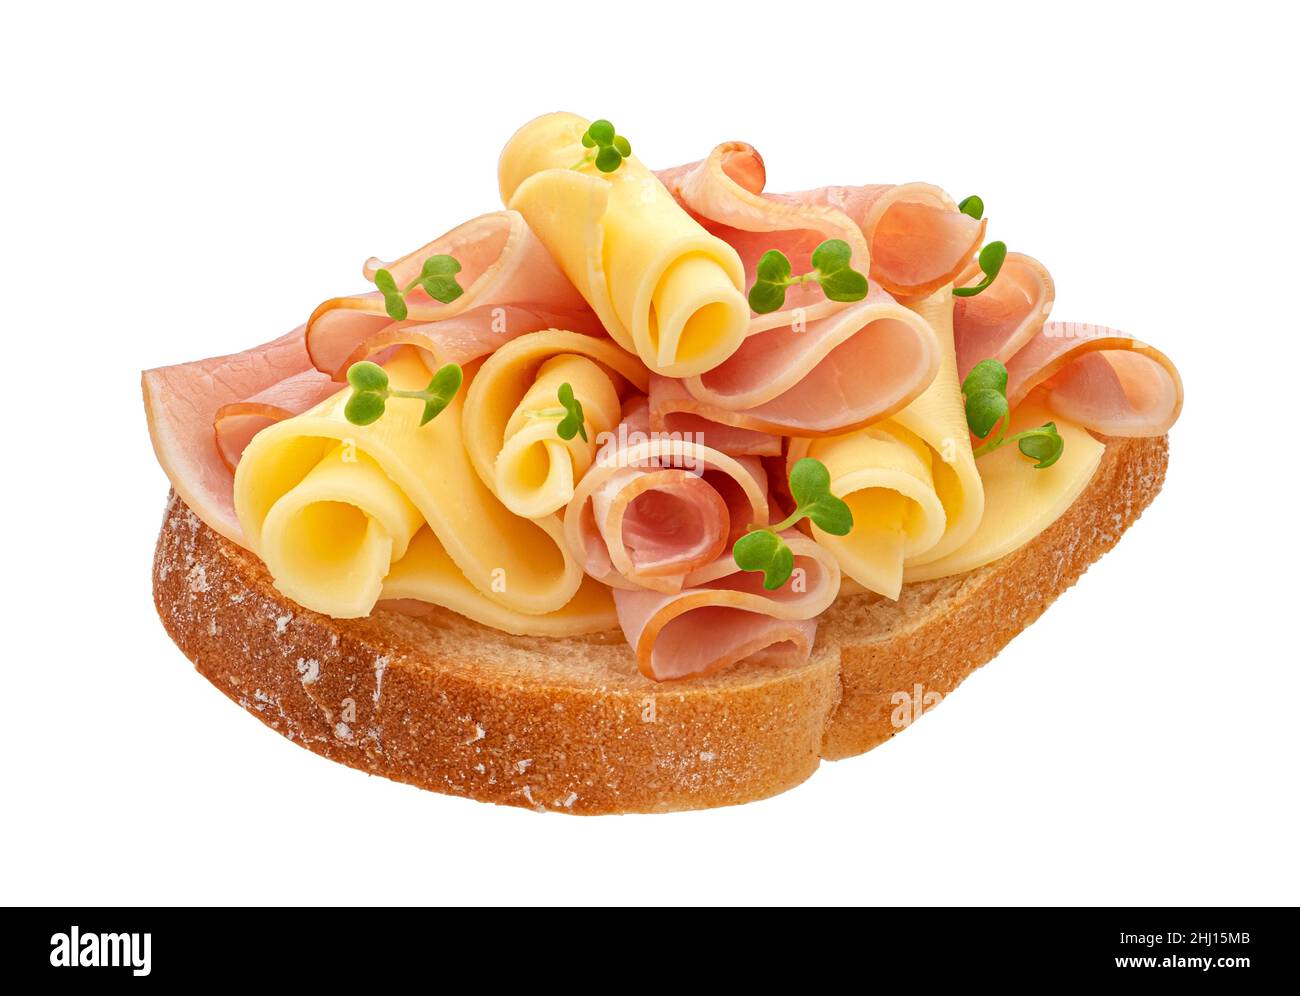 https://c8.alamy.com/comp/2HJ15MB/bread-with-ham-and-cheese-slices-isolated-on-white-background-2HJ15MB.jpg